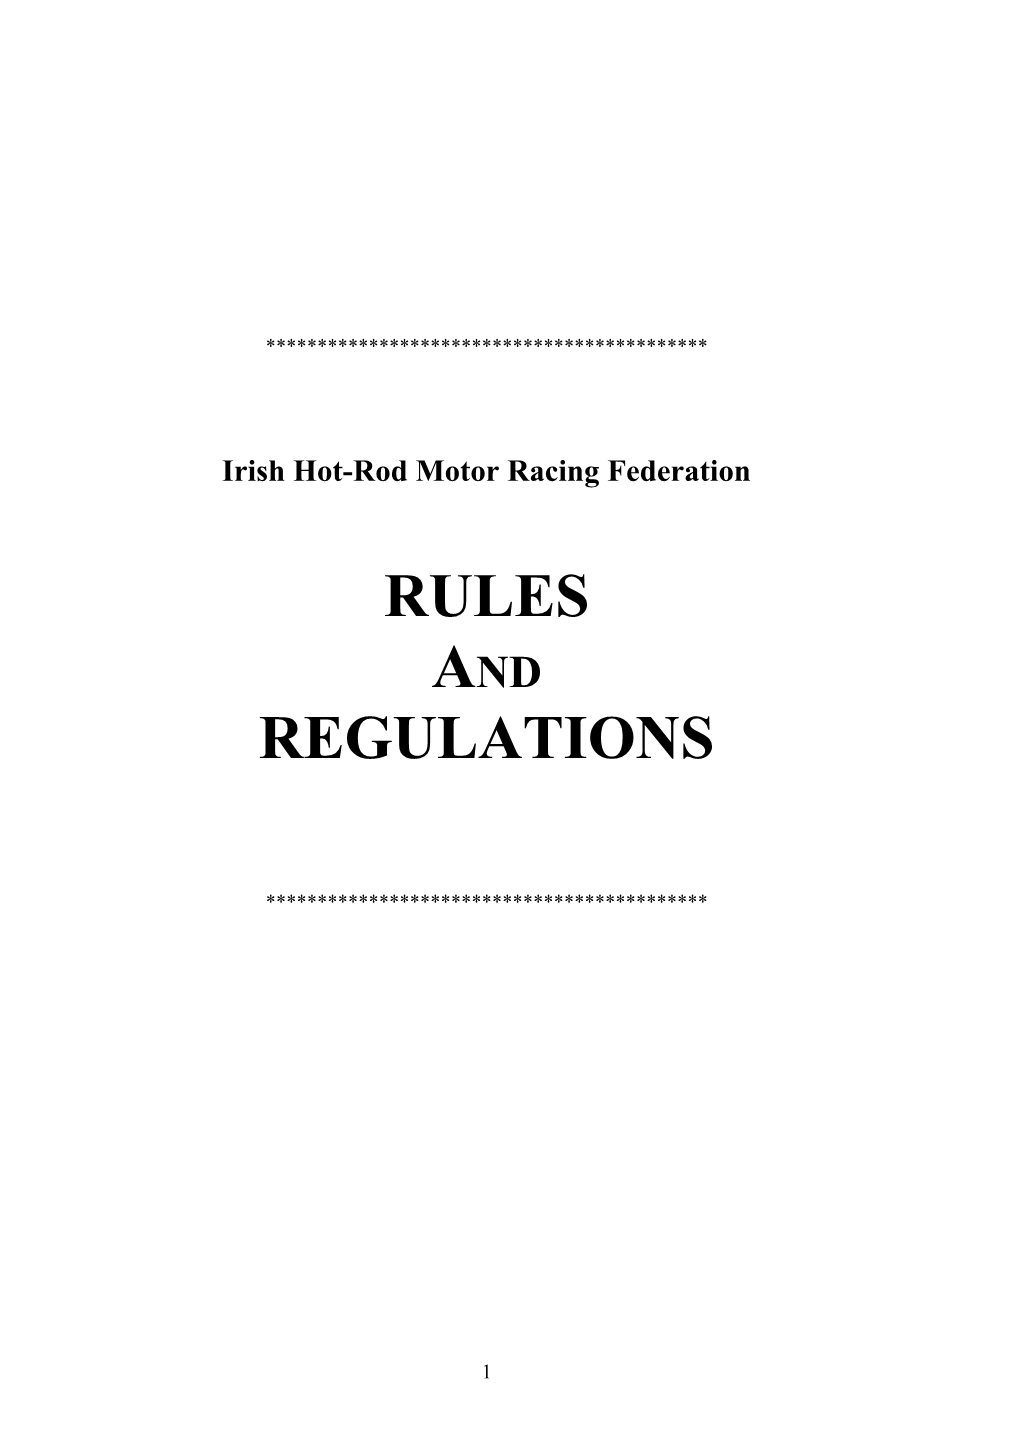 Hotrod Rules and Regulations